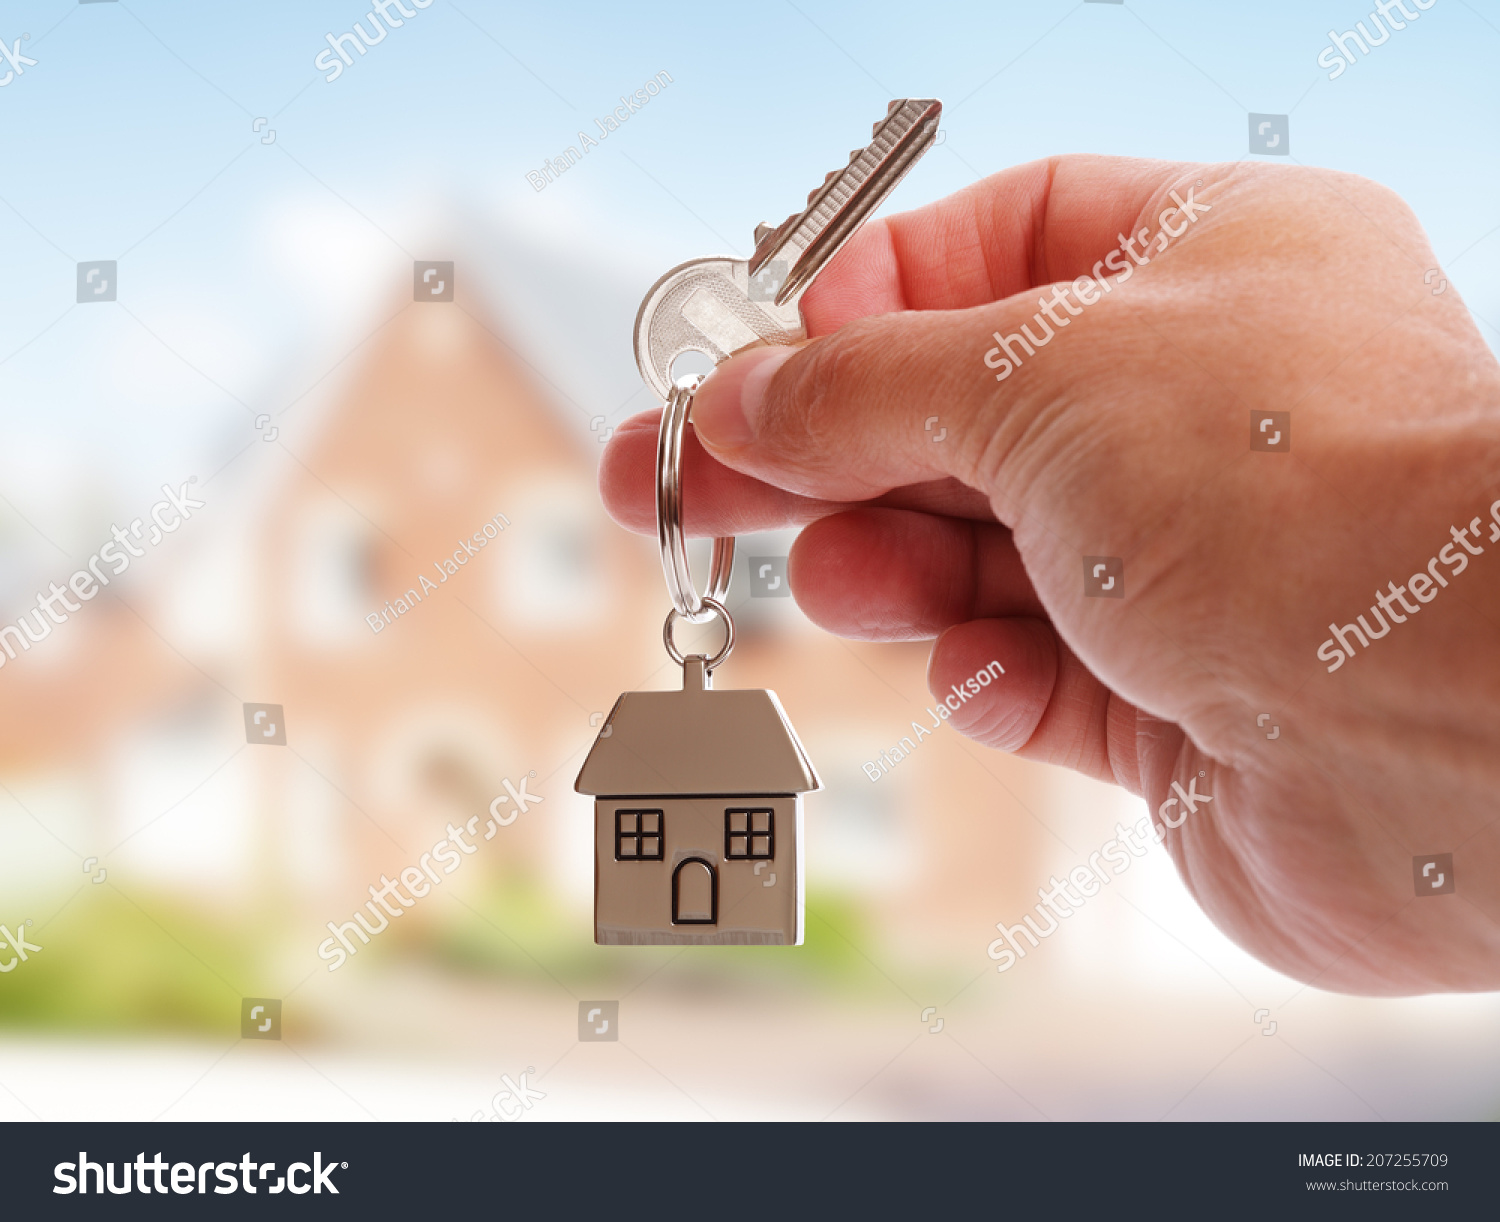 Holding house keys on house shaped keychain in front of a new home #207255709